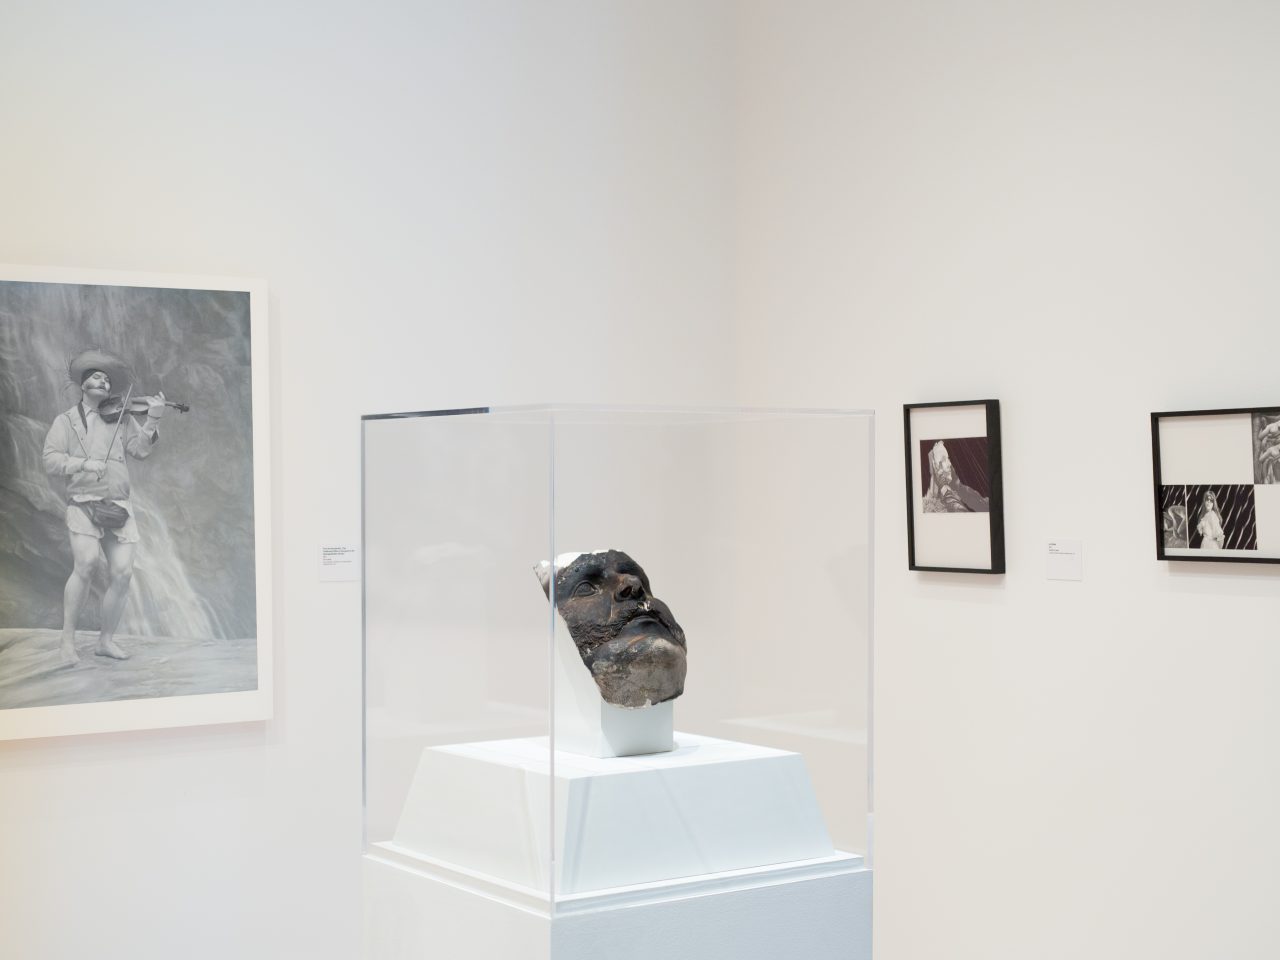 A stone mask enclosed in glass surrounded by three drawings on the walls behind it